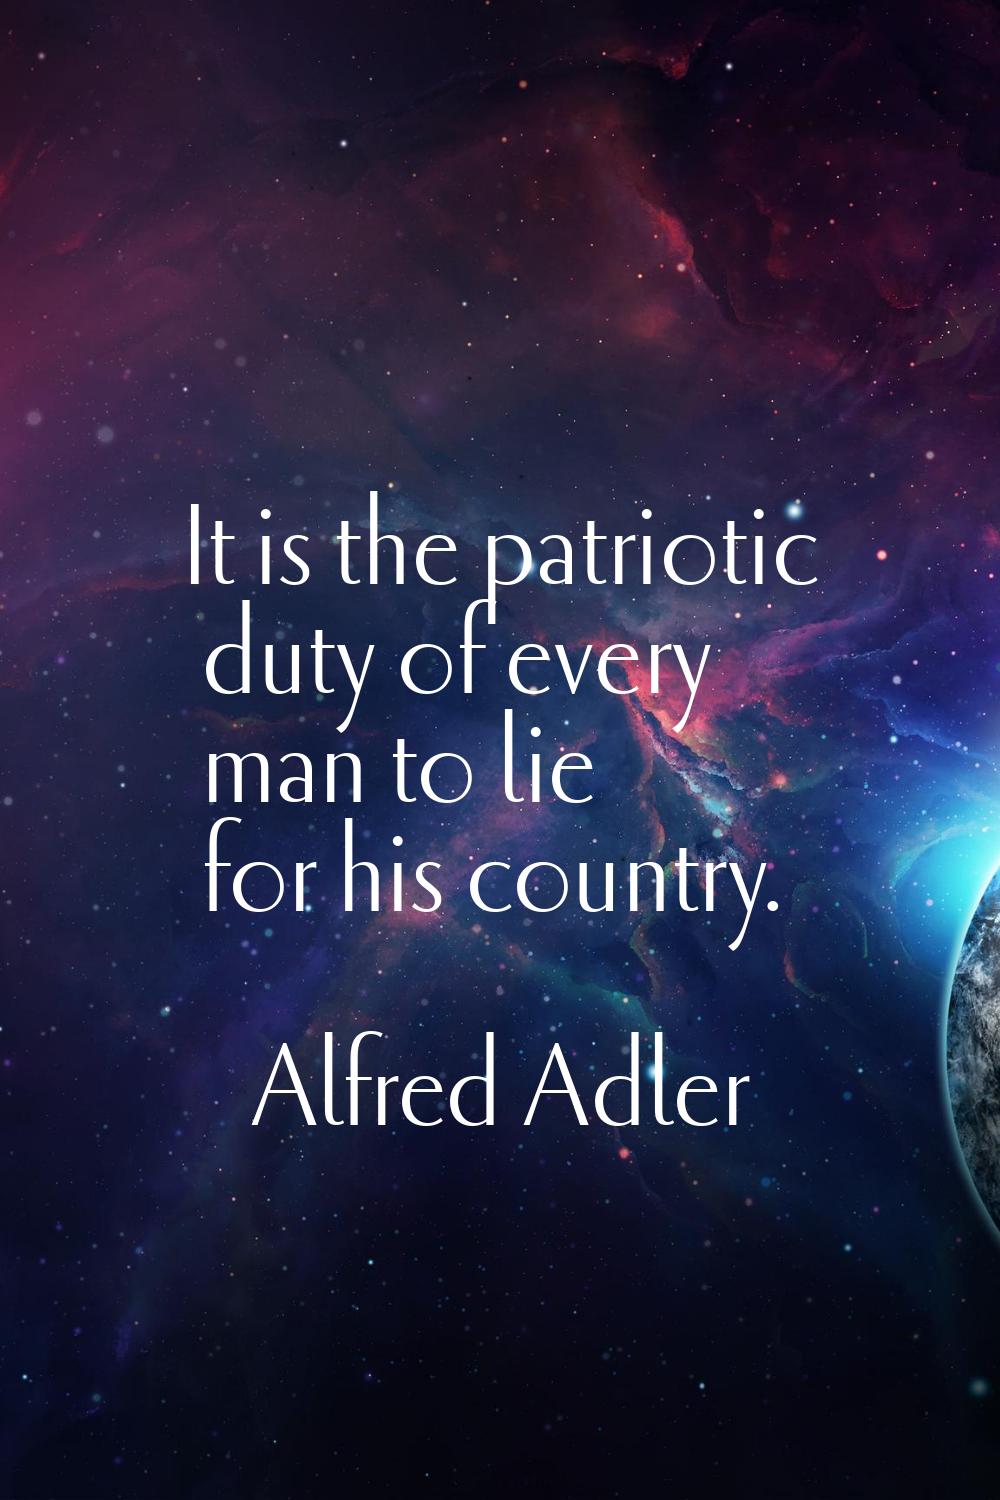 It is the patriotic duty of every man to lie for his country.